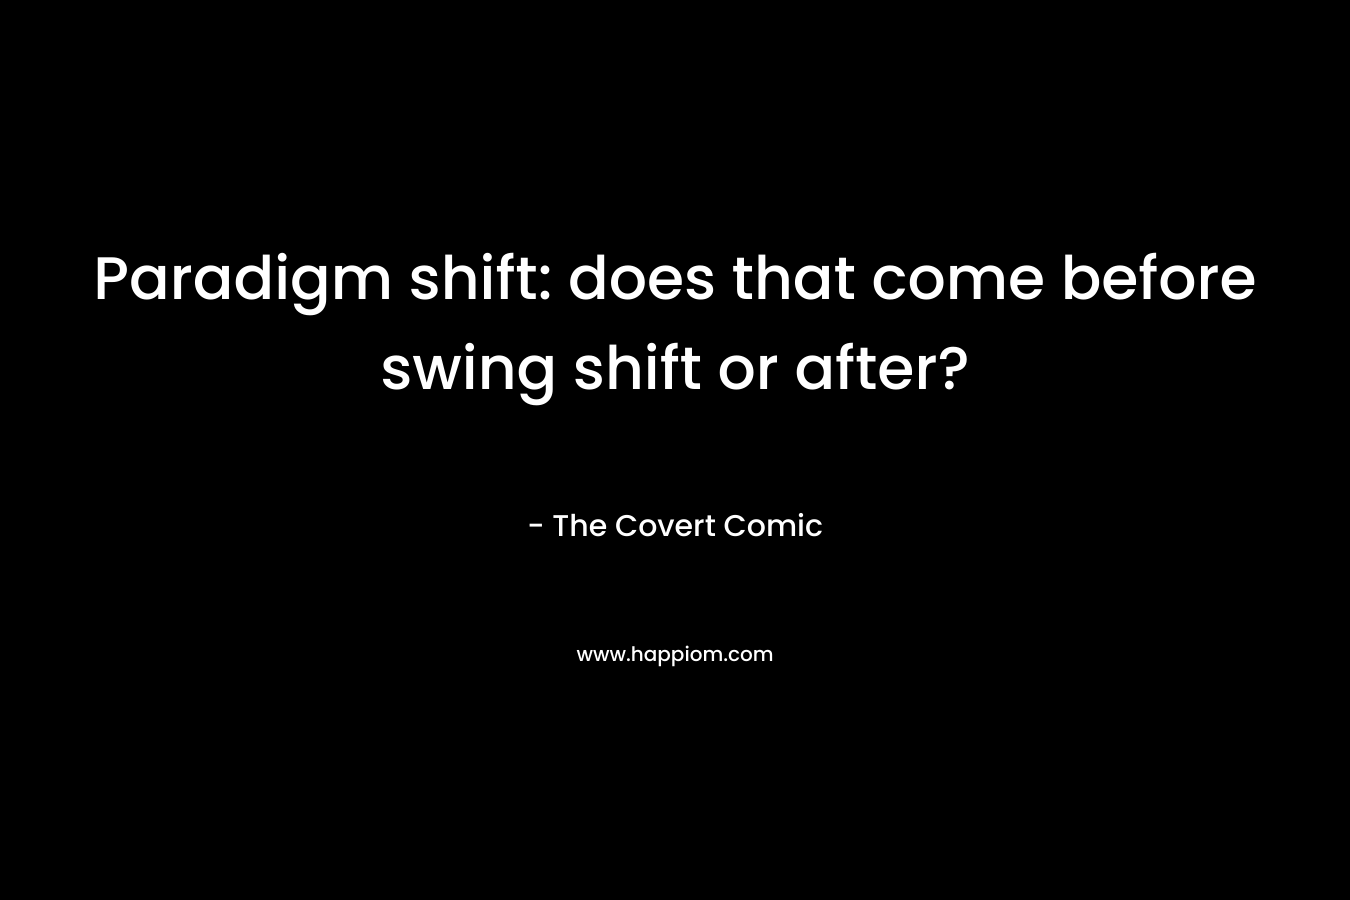 Paradigm shift: does that come before swing shift or after? – The Covert Comic